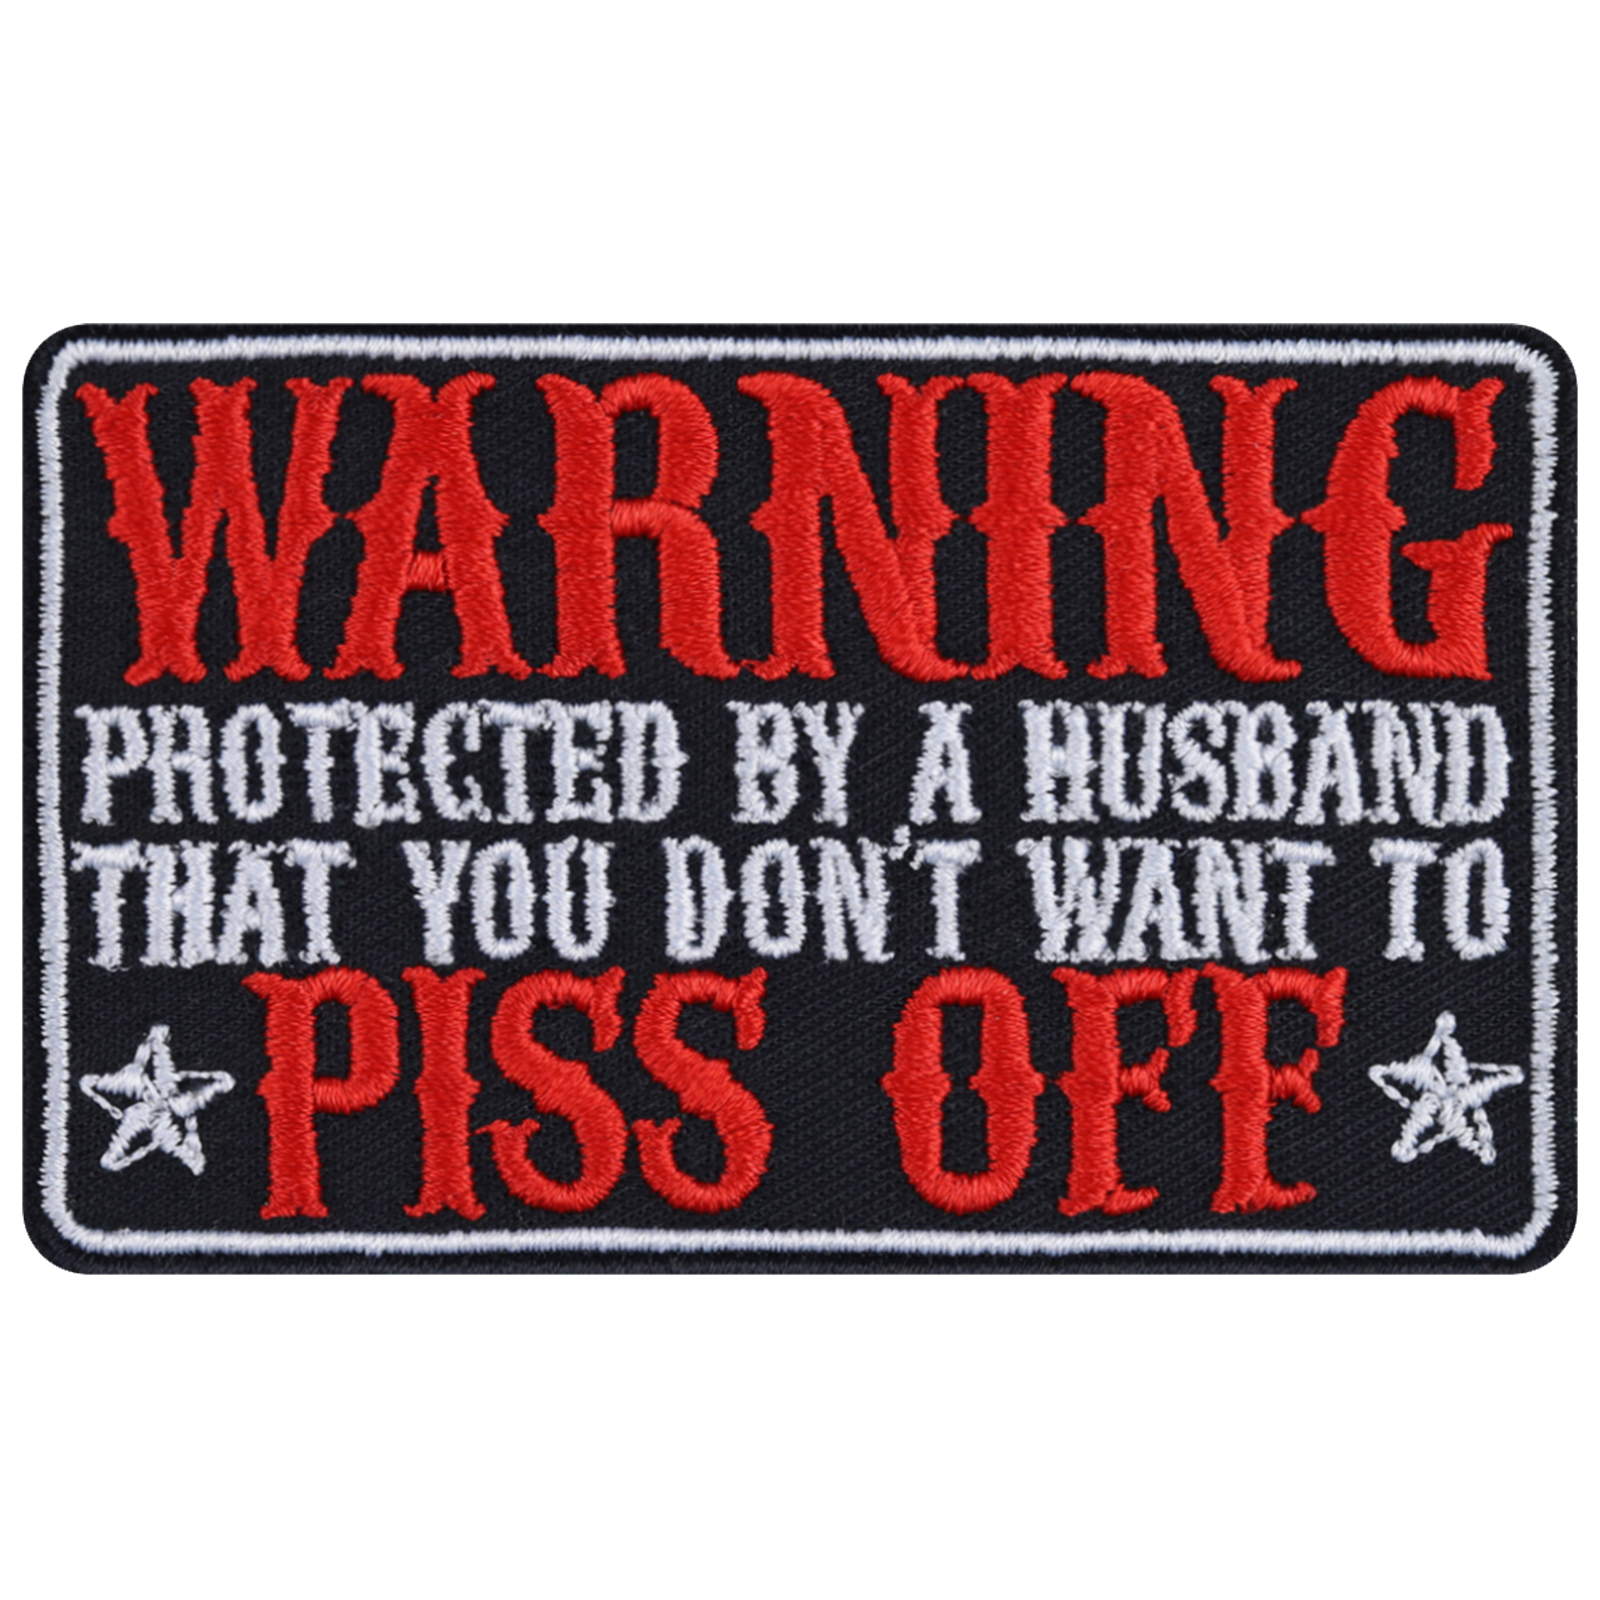 Warning: Protected by a husband that you don't want to piss off - Patch